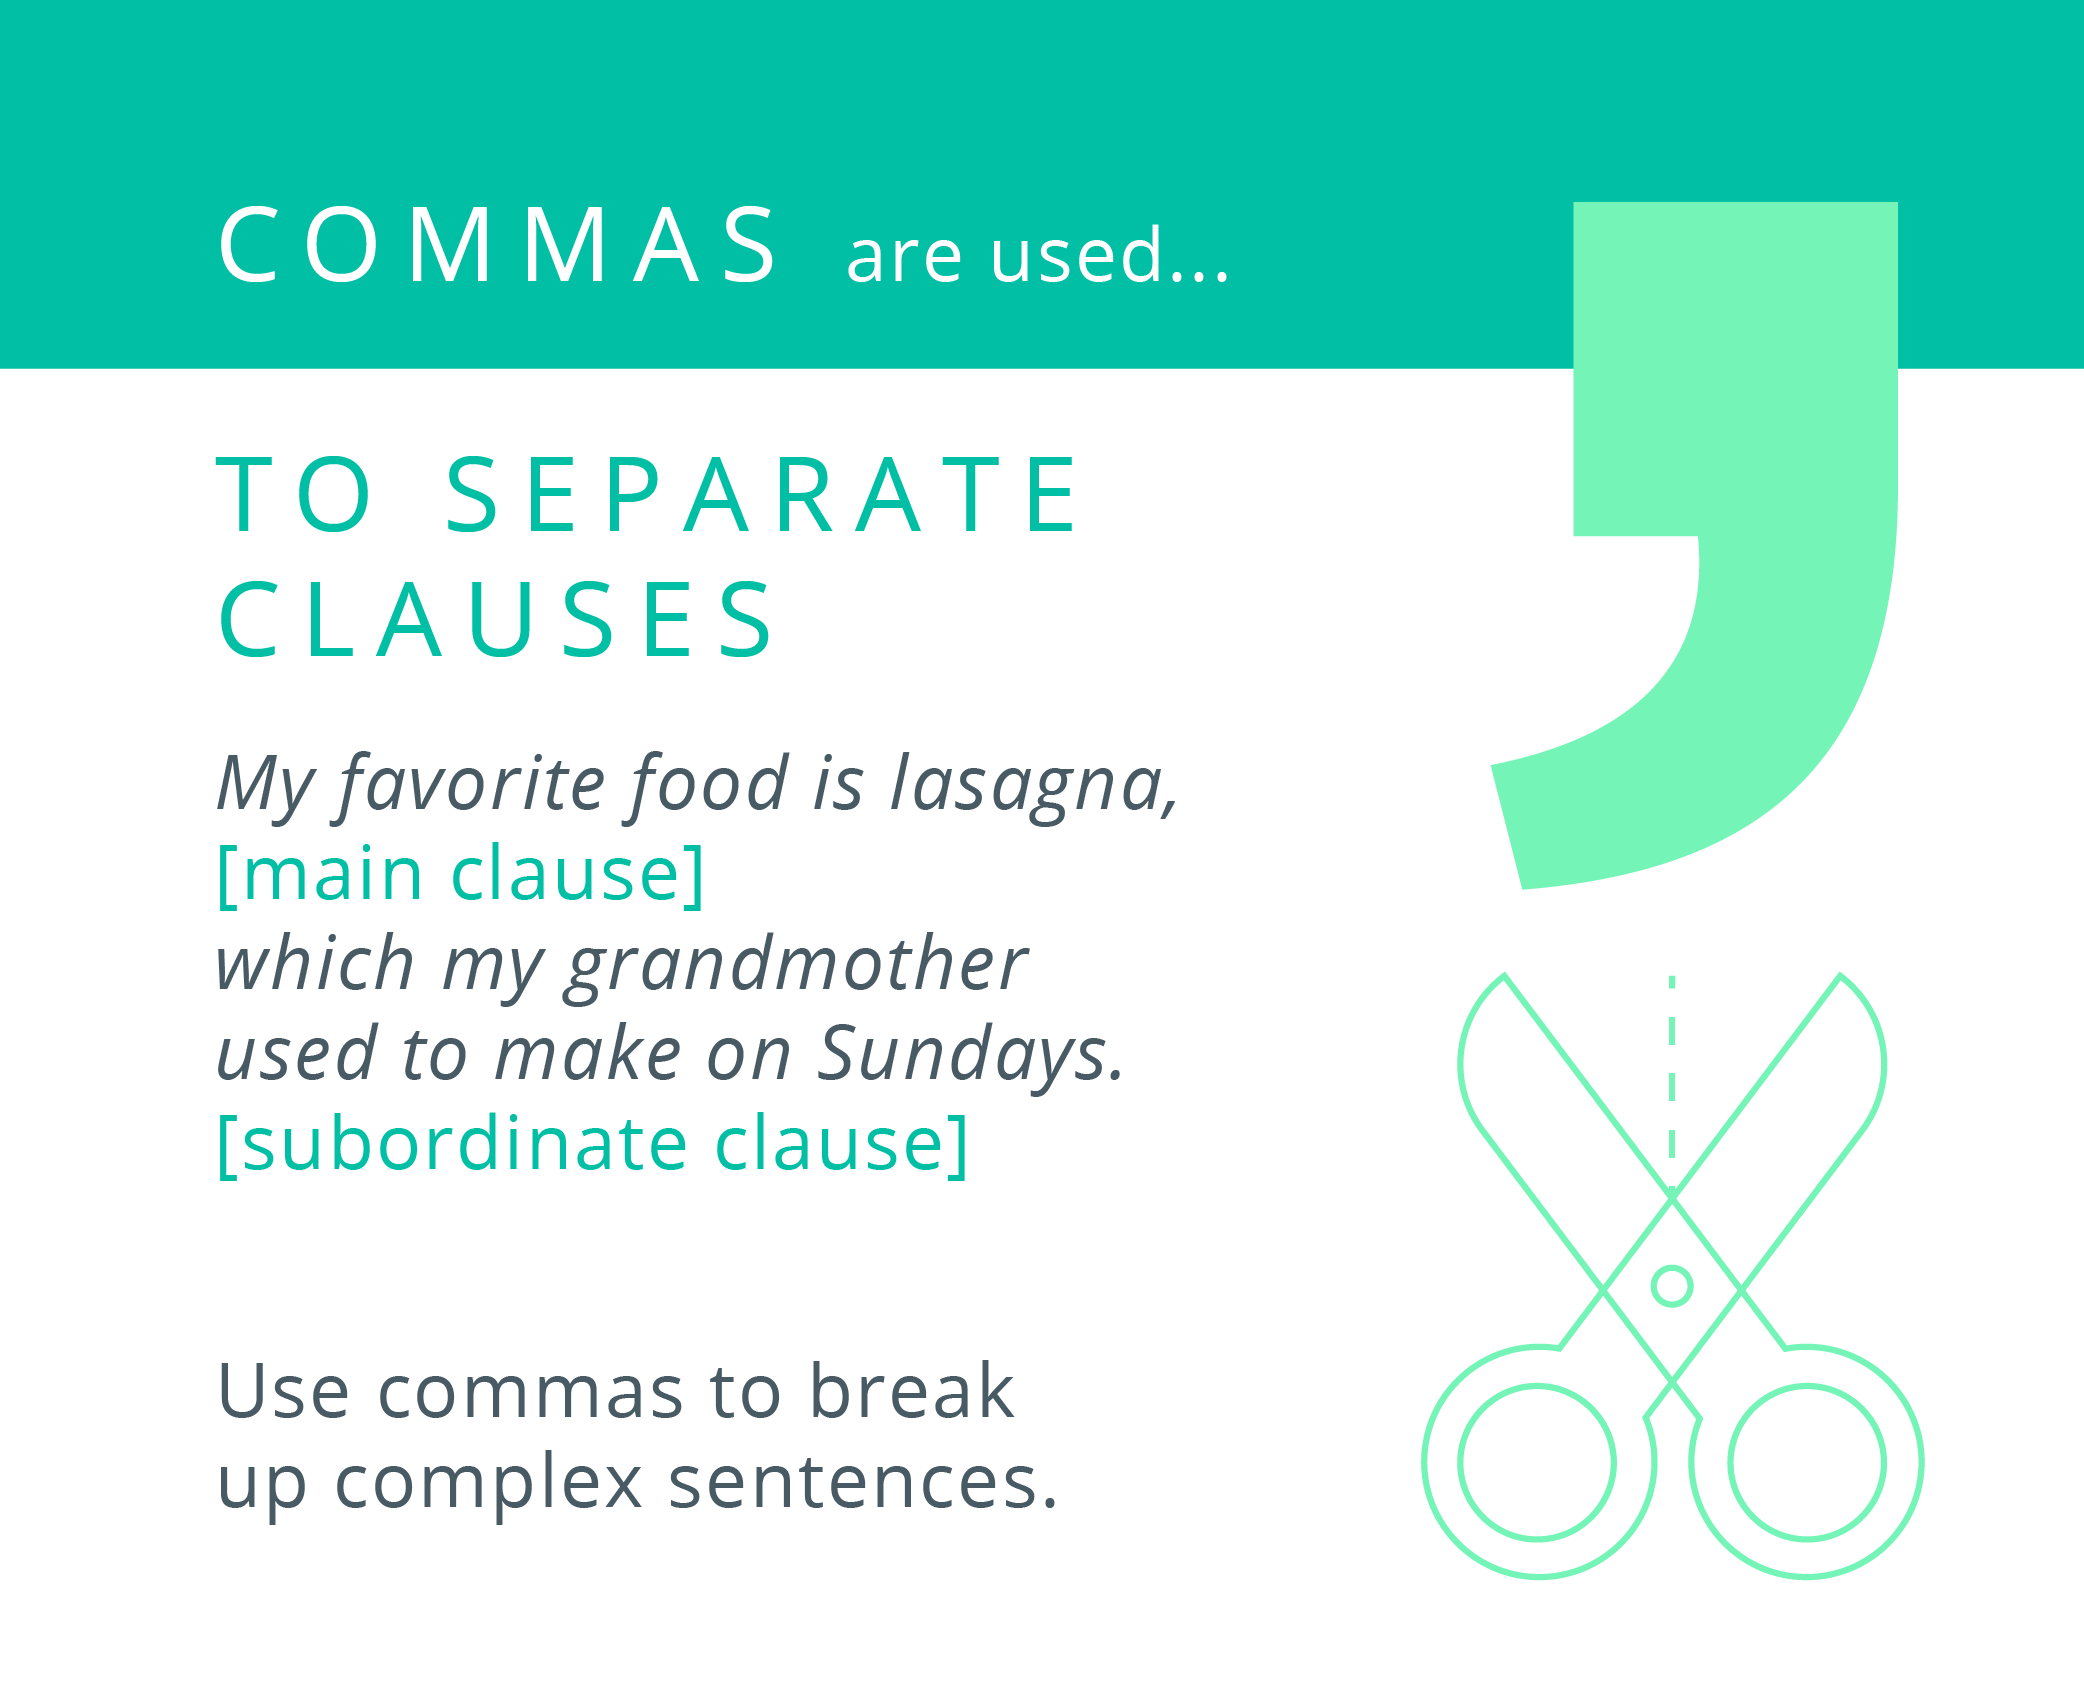 Commas are used to separate clauses.